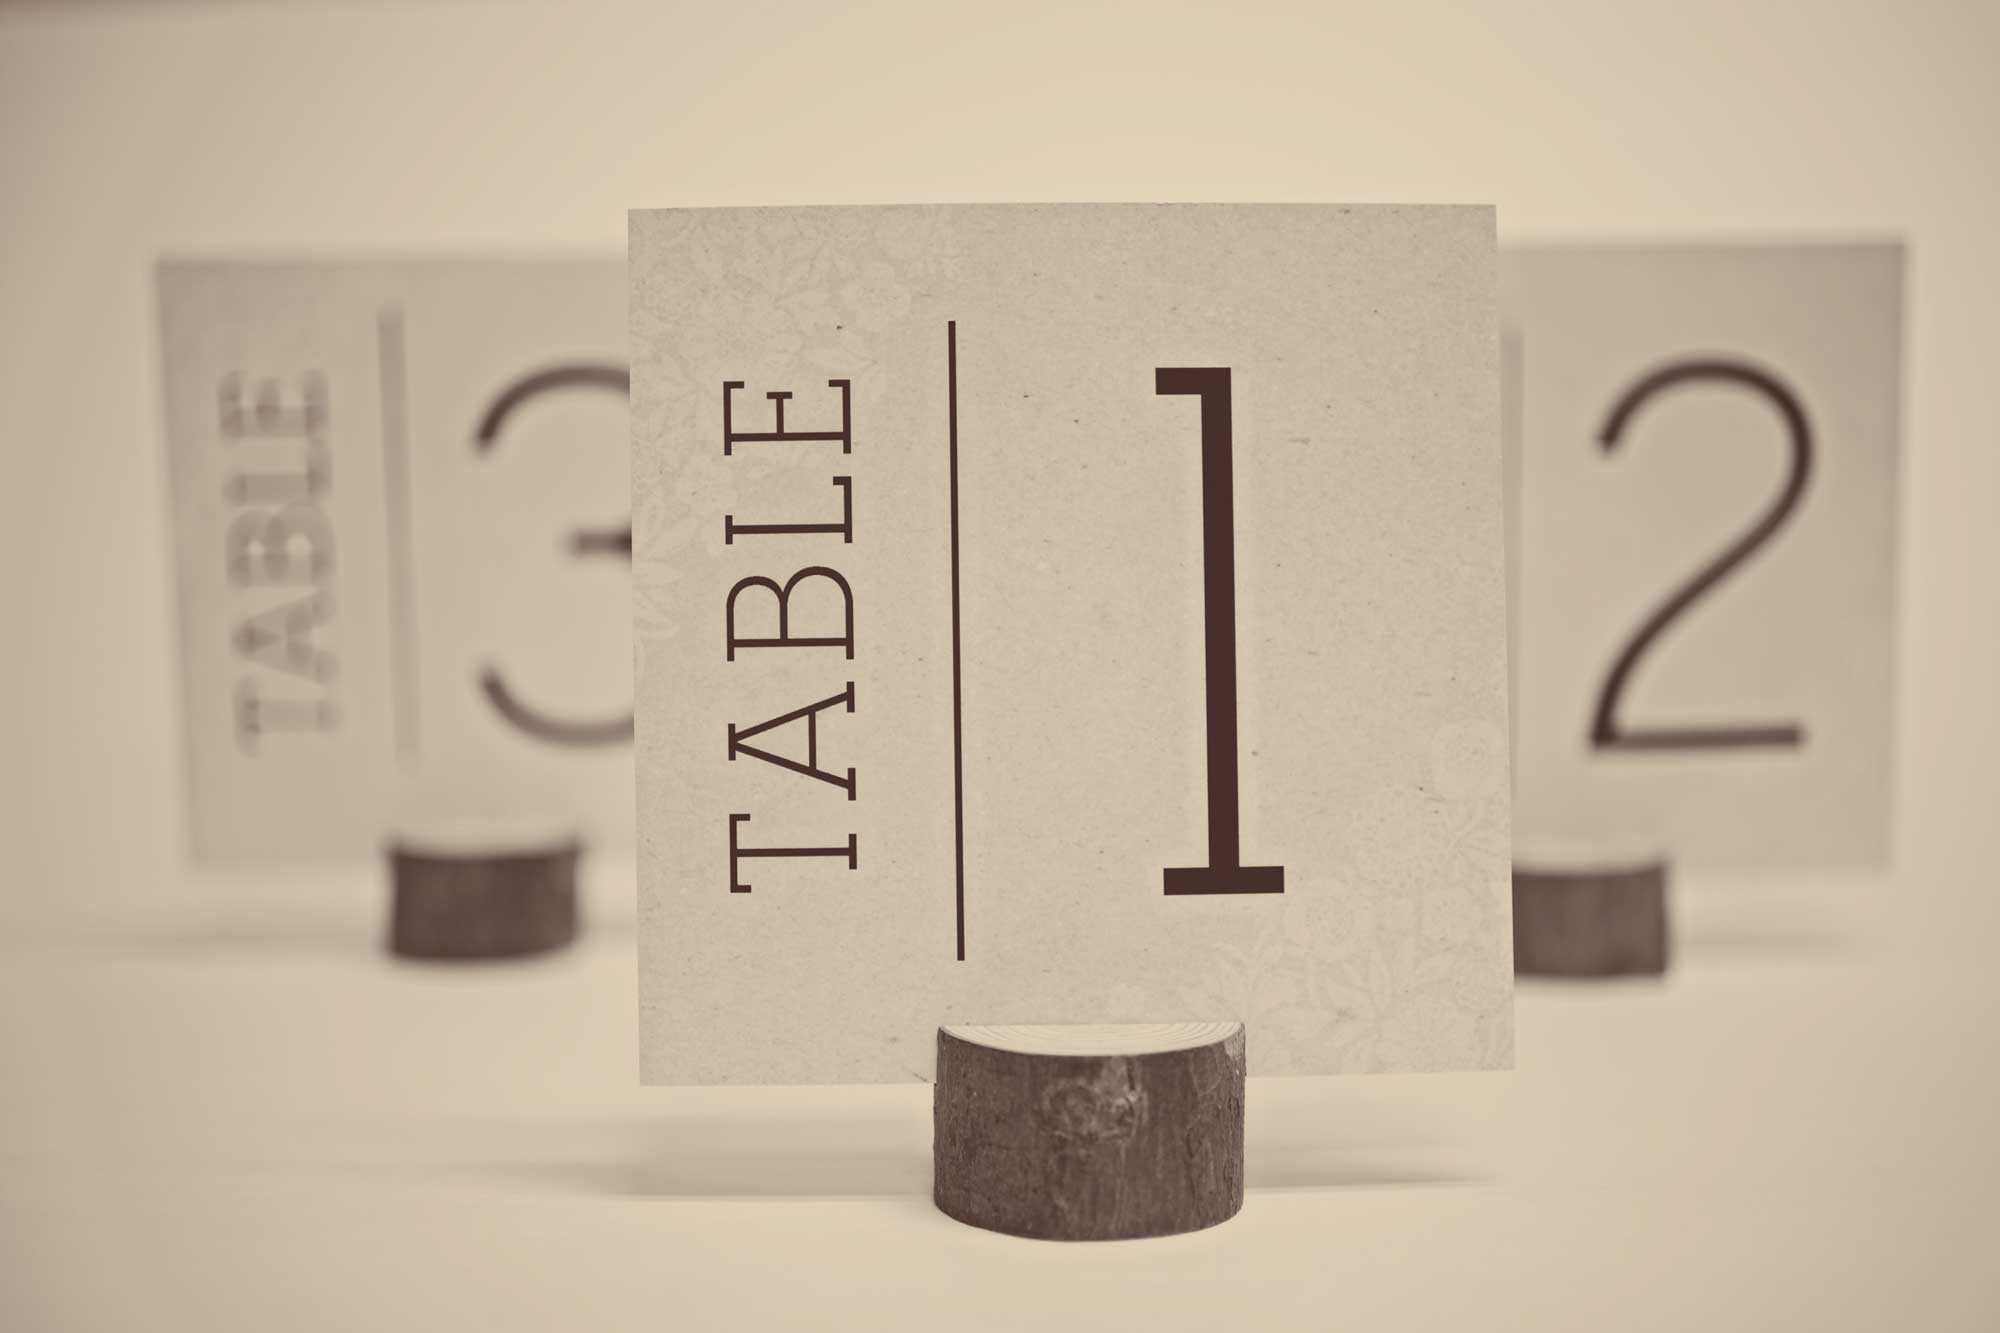 Free Wedding Table Number Cards In Table Number Cards Template